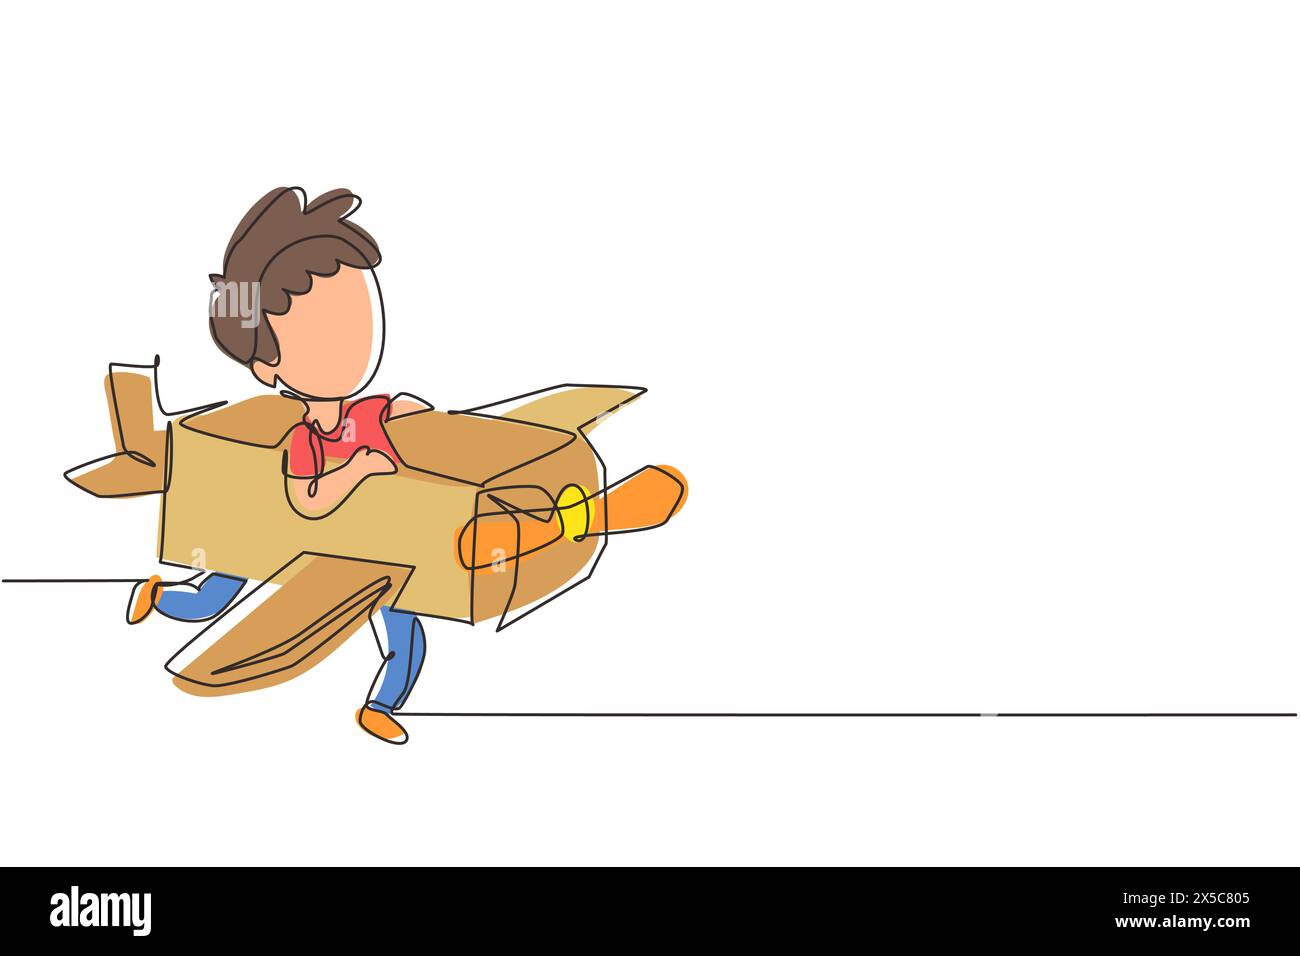 Single one line drawing creative boy playing as pilot with cardboard airplane. Happy kids riding cardboard handmade airplane. Plane game. Modern conti Stock Vector